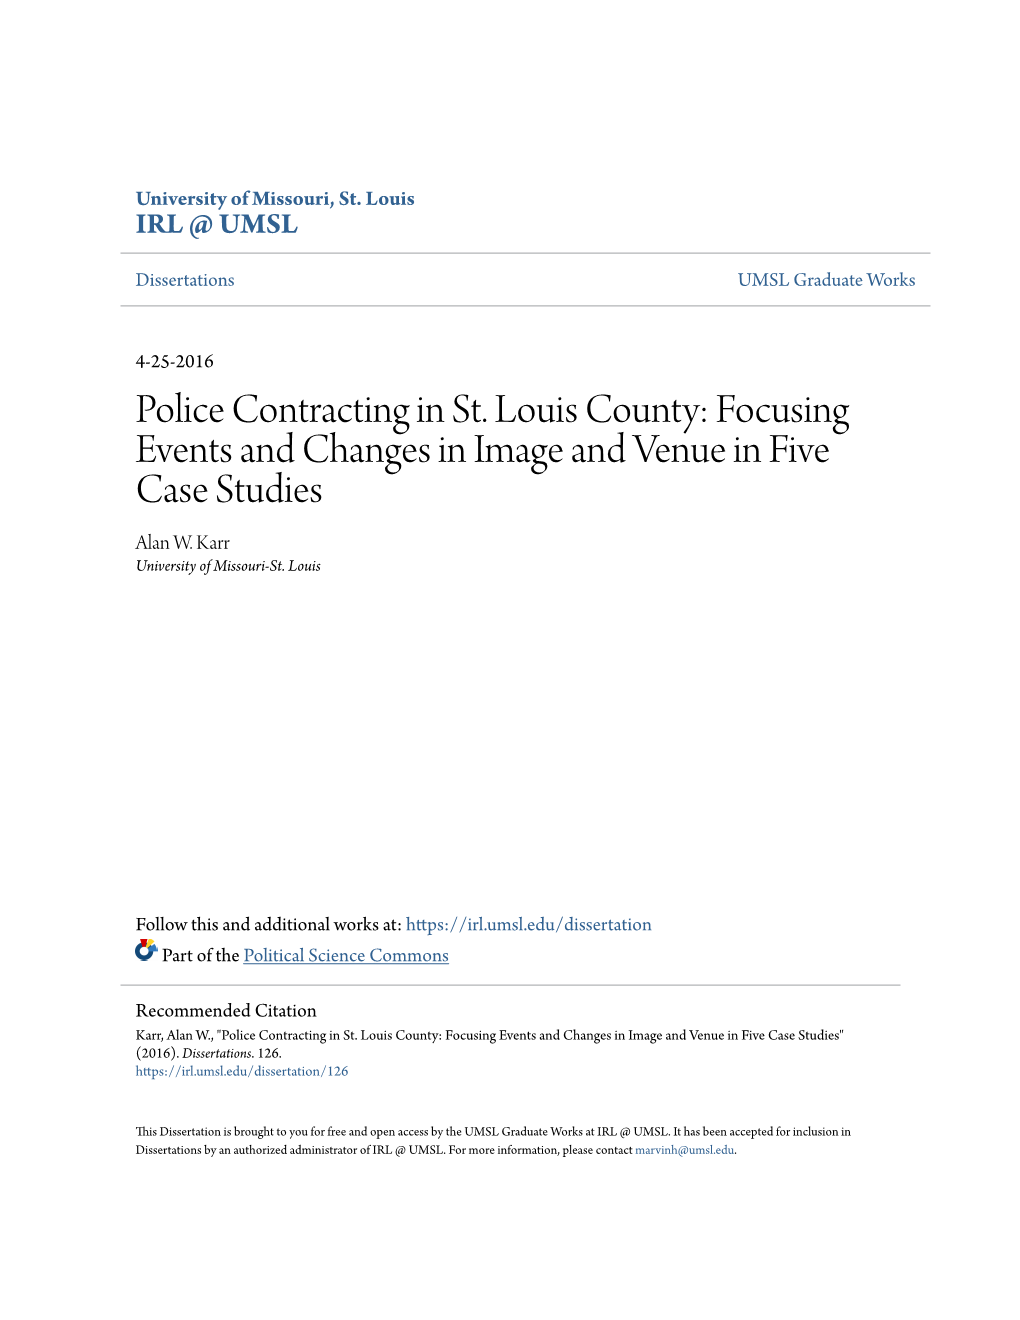 Police Contracting in St. Louis County: Focusing Events and Changes in Image and Venue in Five Case Studies Alan W